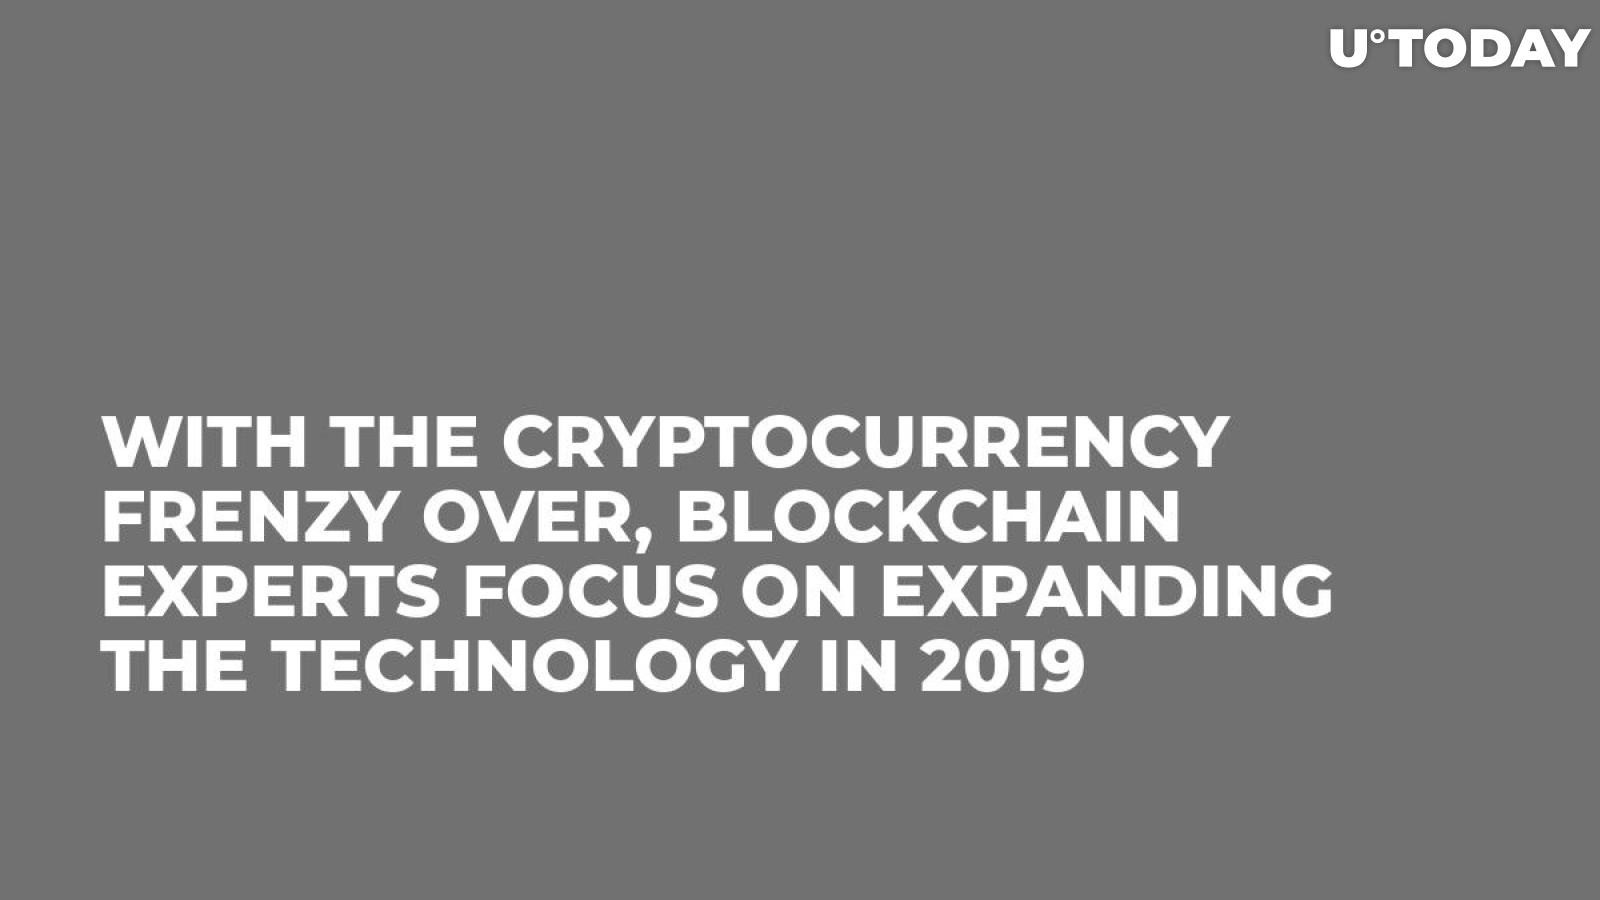 With the Cryptocurrency Frenzy Over, Blockchain Experts Focus on Expanding the Technology in 2019